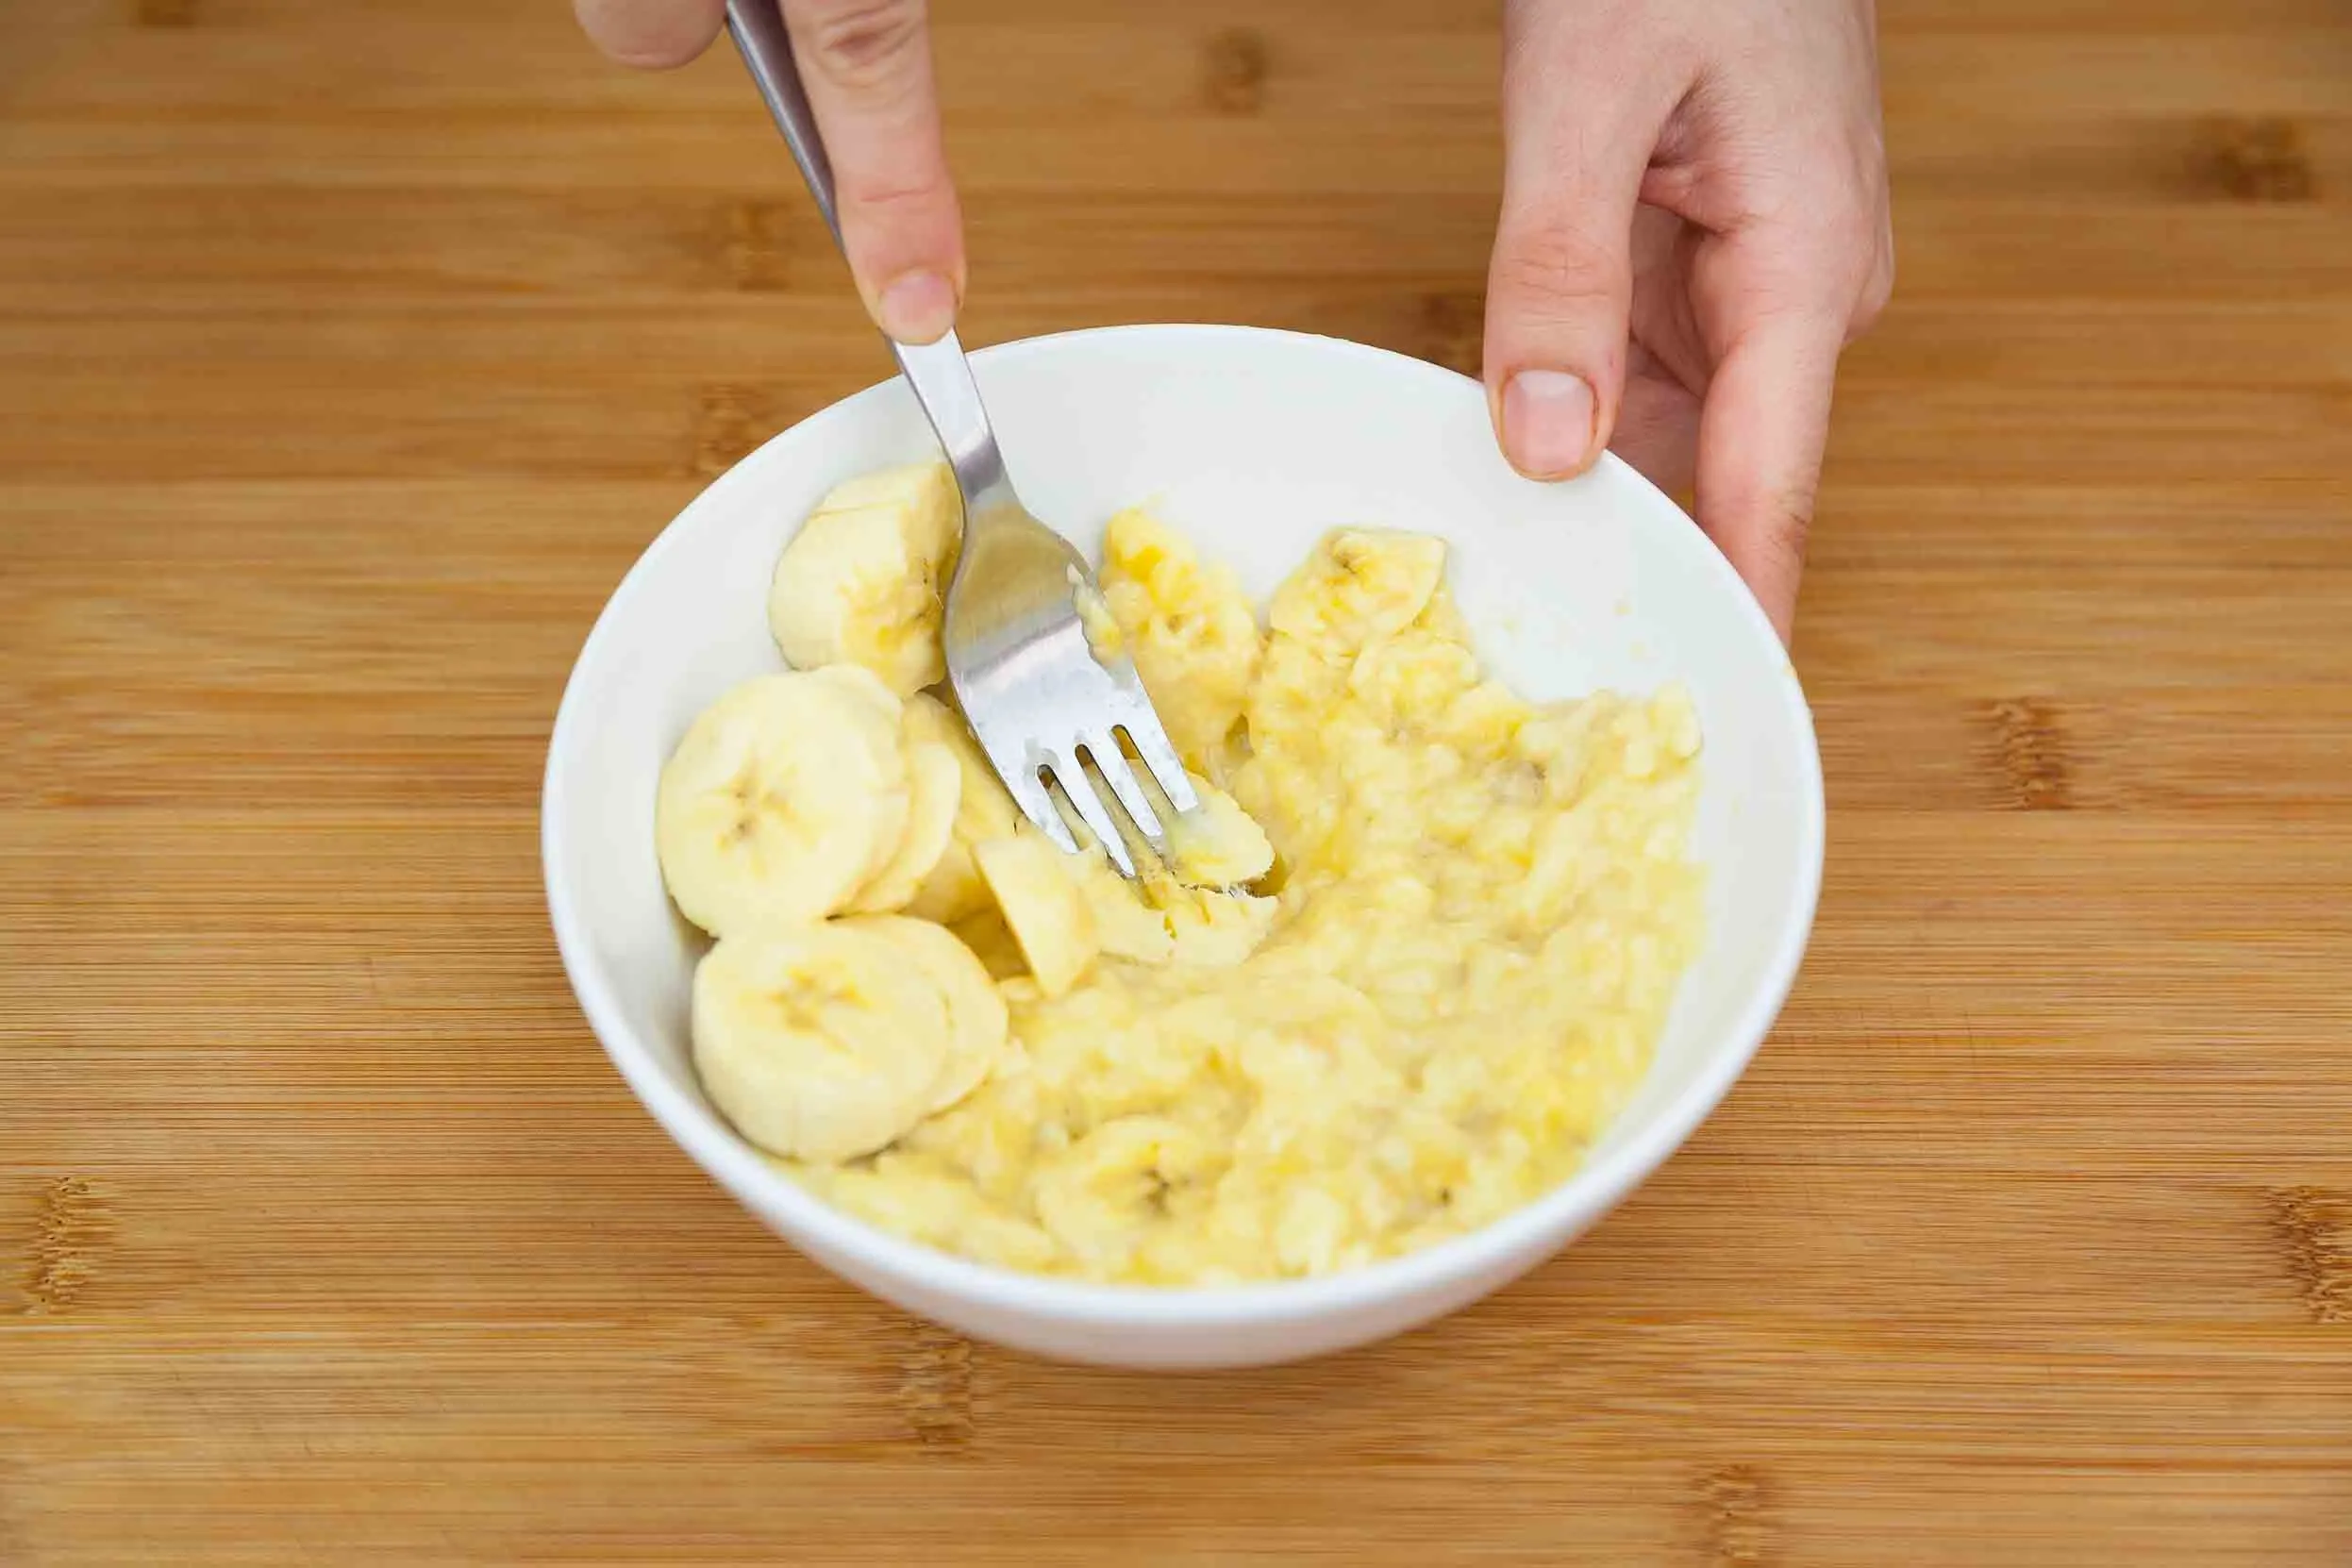 A person's hands mashing a sliced banana in a bowl with a fork.